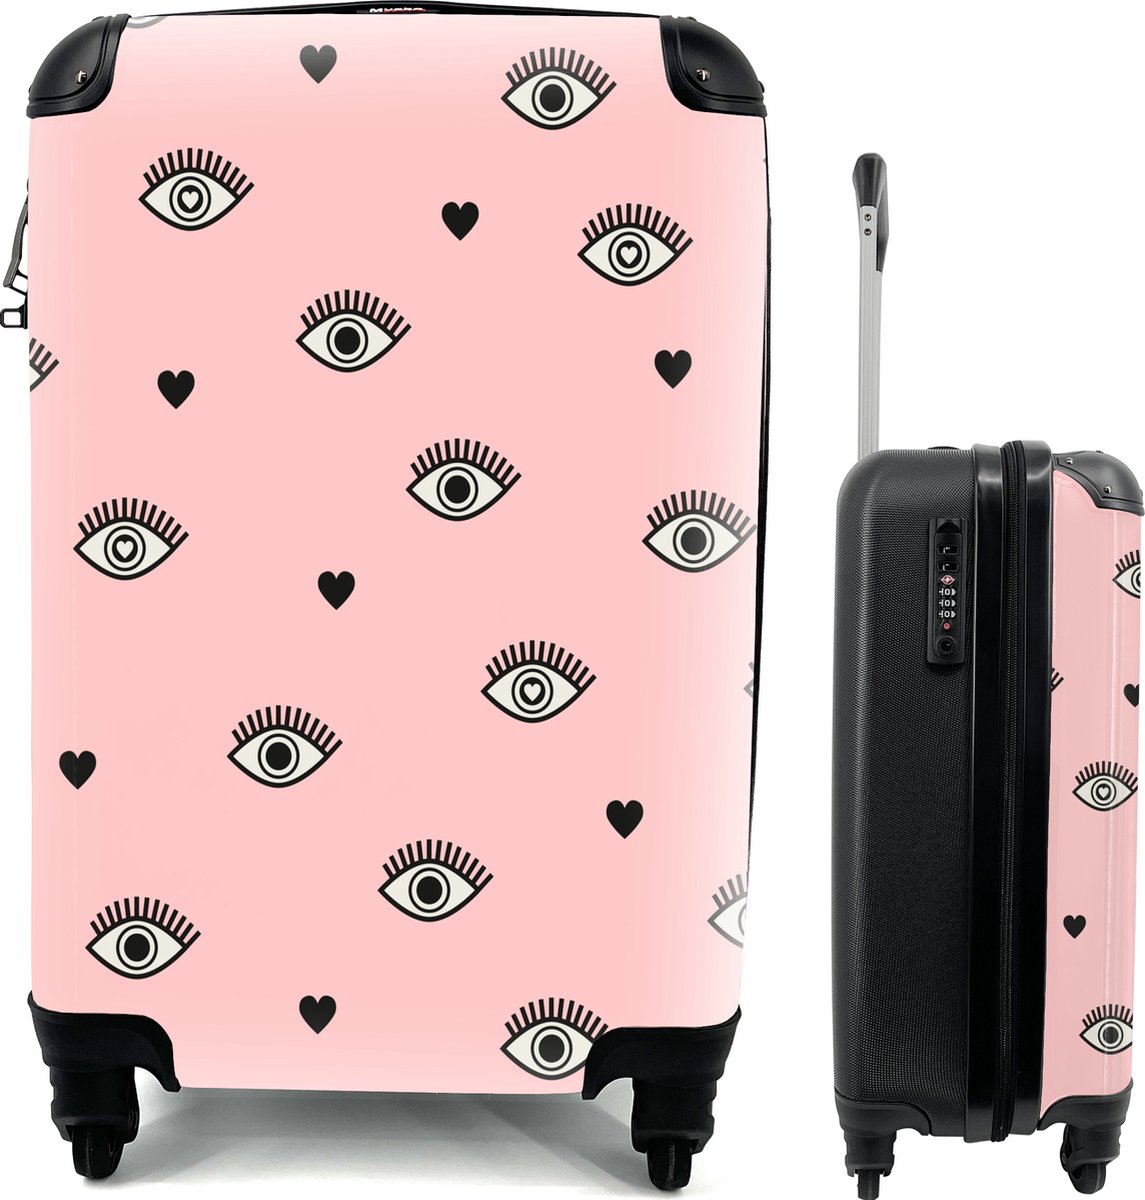 Valise - Fille - Yeux - Rose - Motifs - 35x55x20 cm - Bagage à main -  Trolley - Valise